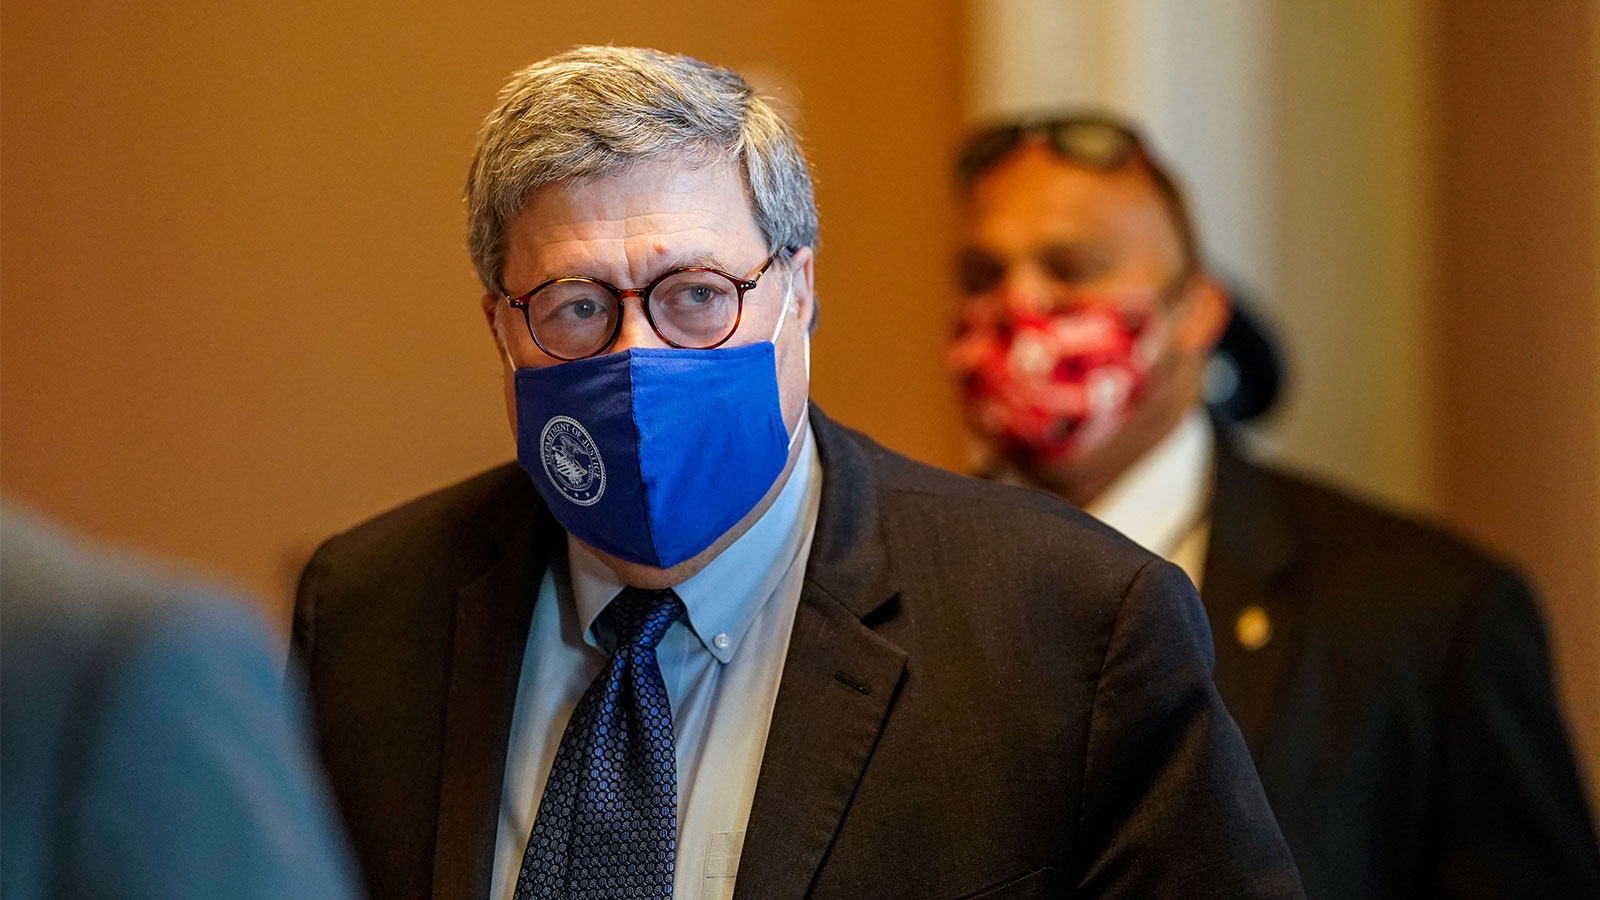 A Renewed Call for the Resignation of Attorney General William Barr